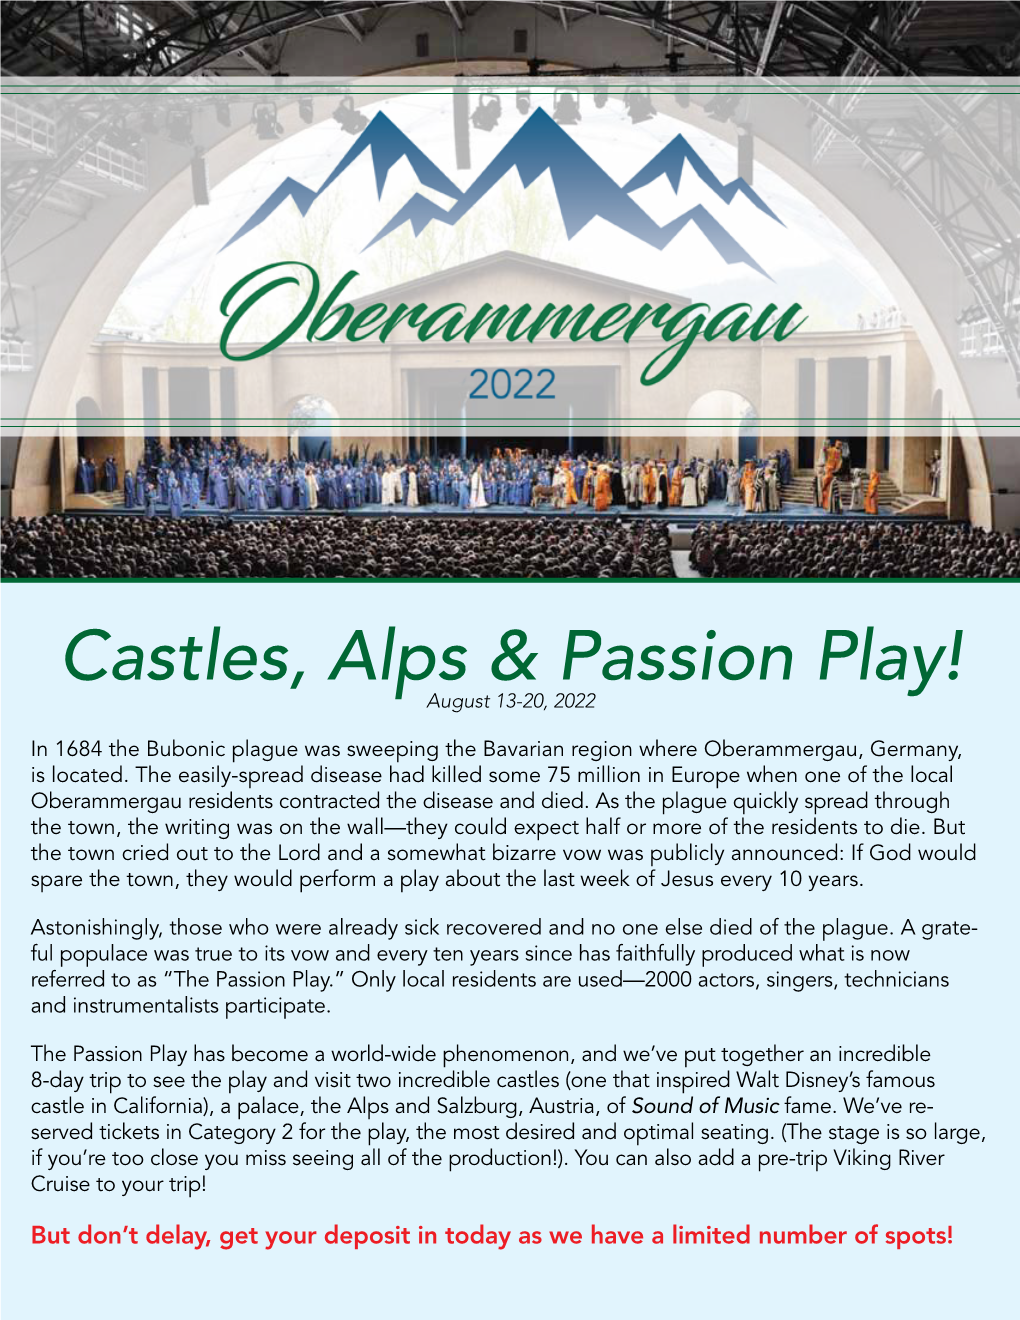 Castles, Alps & Passion Play!